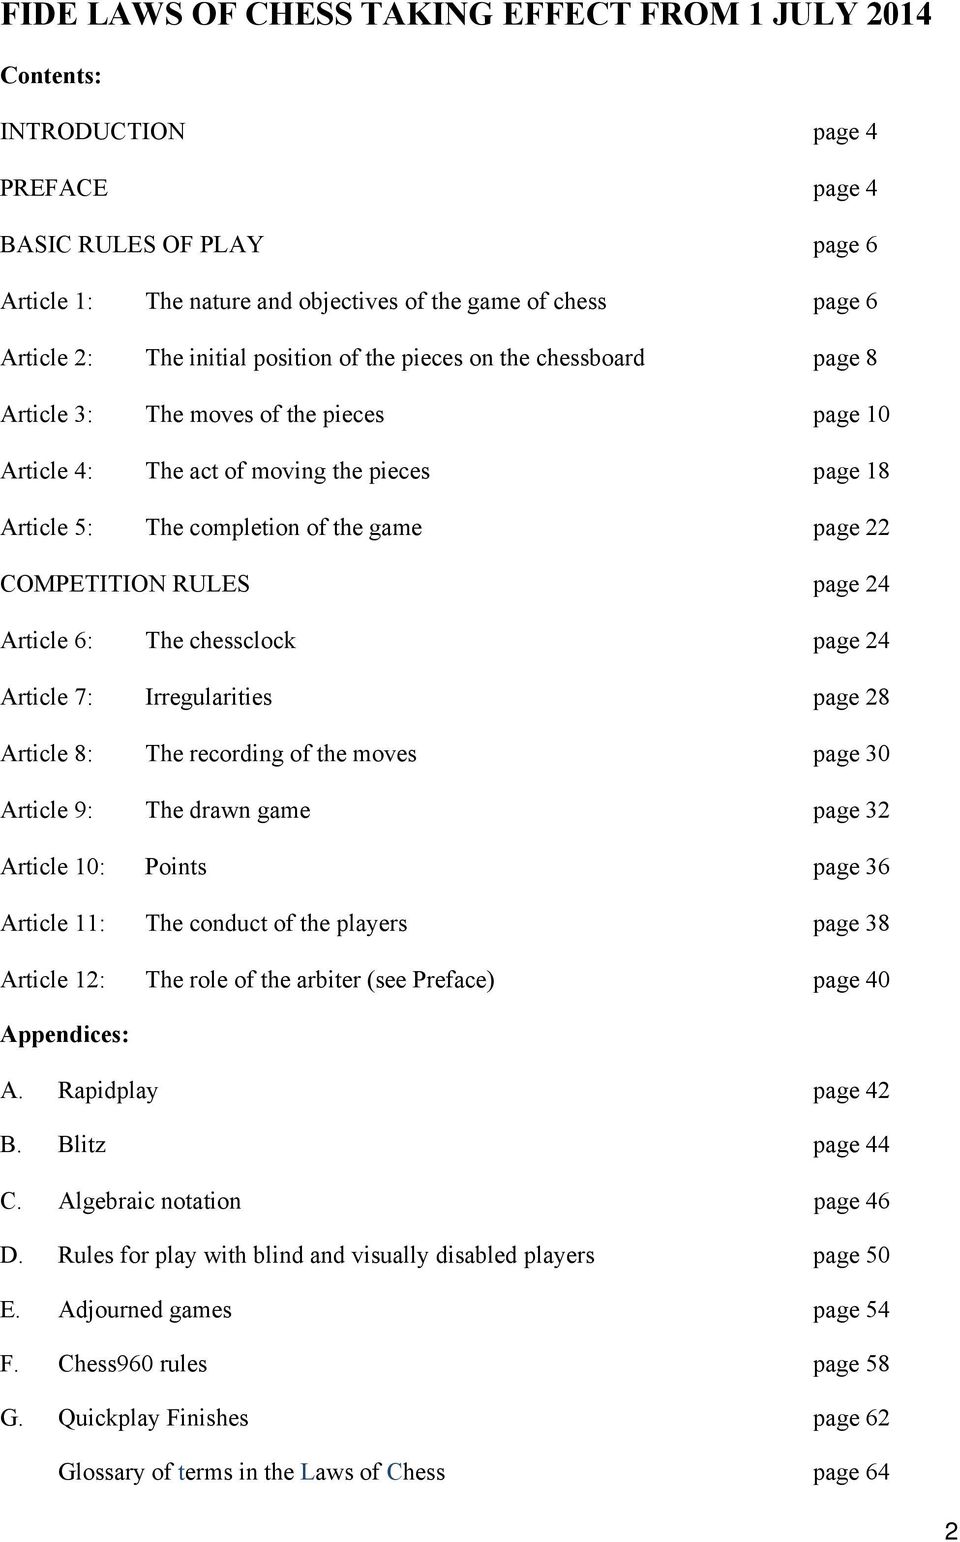 COMPETITION RULES page 24 Article 6: The chessclock page 24 Article 7: Irregularities page 28 Article 8: The recording of the moves page 30 Article 9: The drawn game page 32 Article 10: Points page